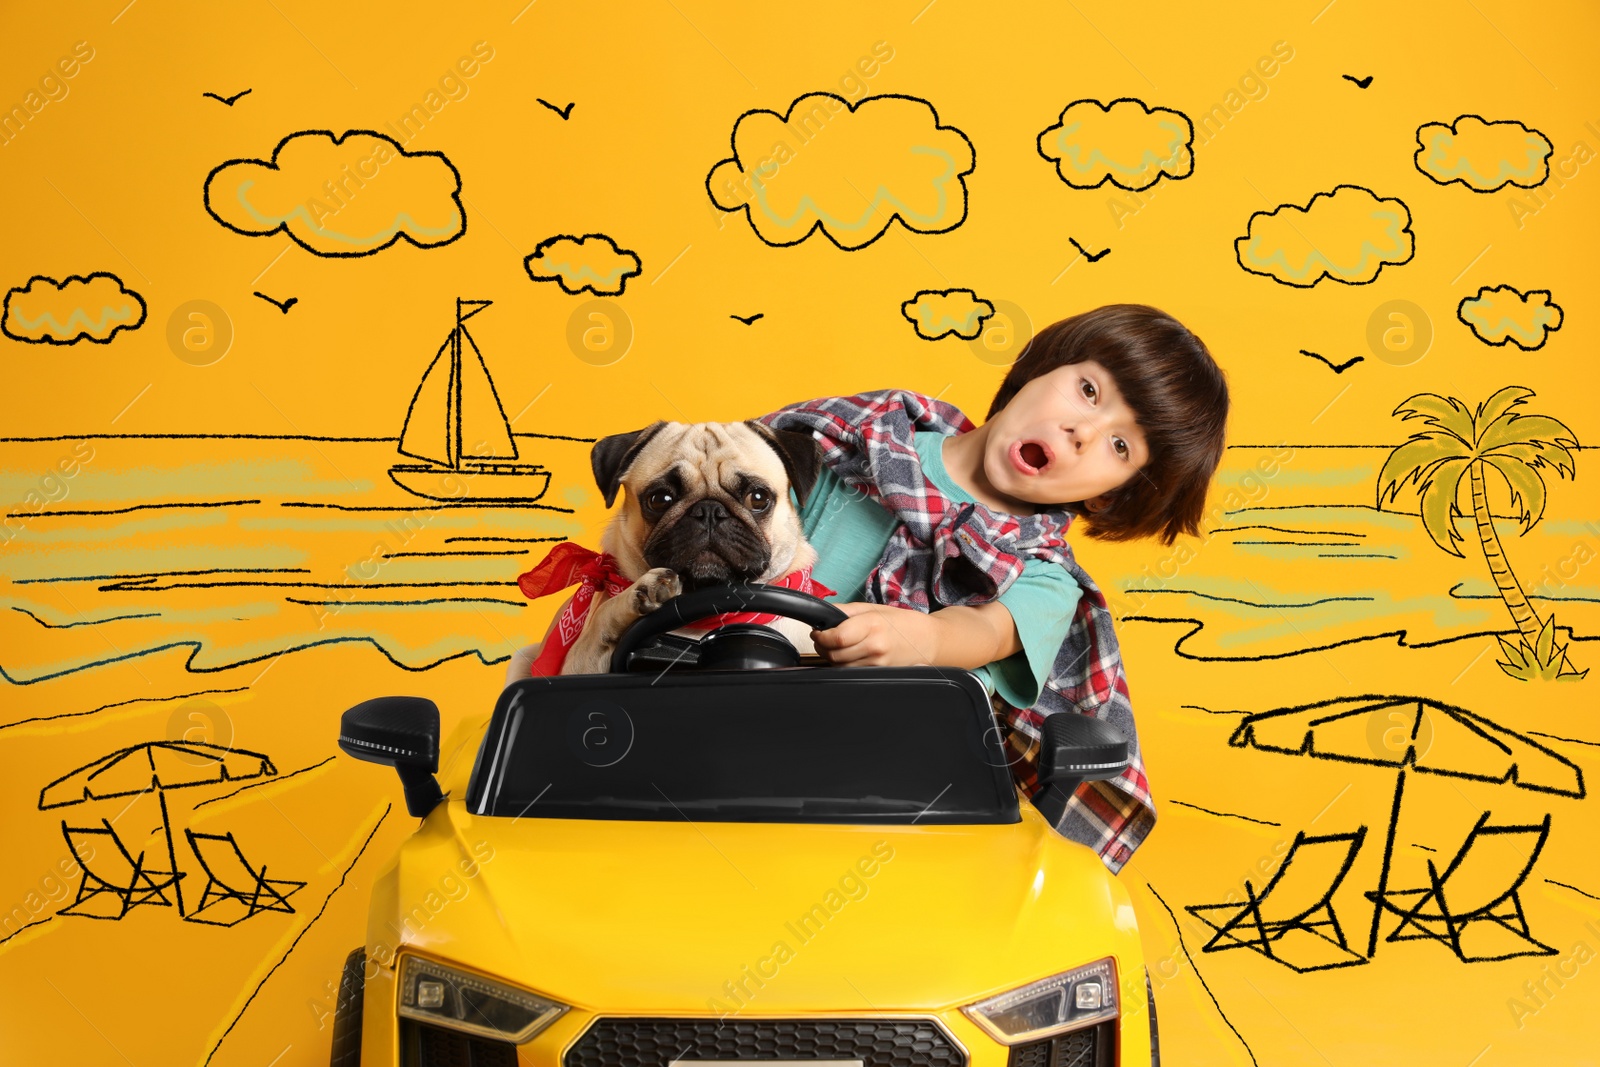 Image of Cute little boy with his dog in toy car and drawing of tropical resort on yellow background